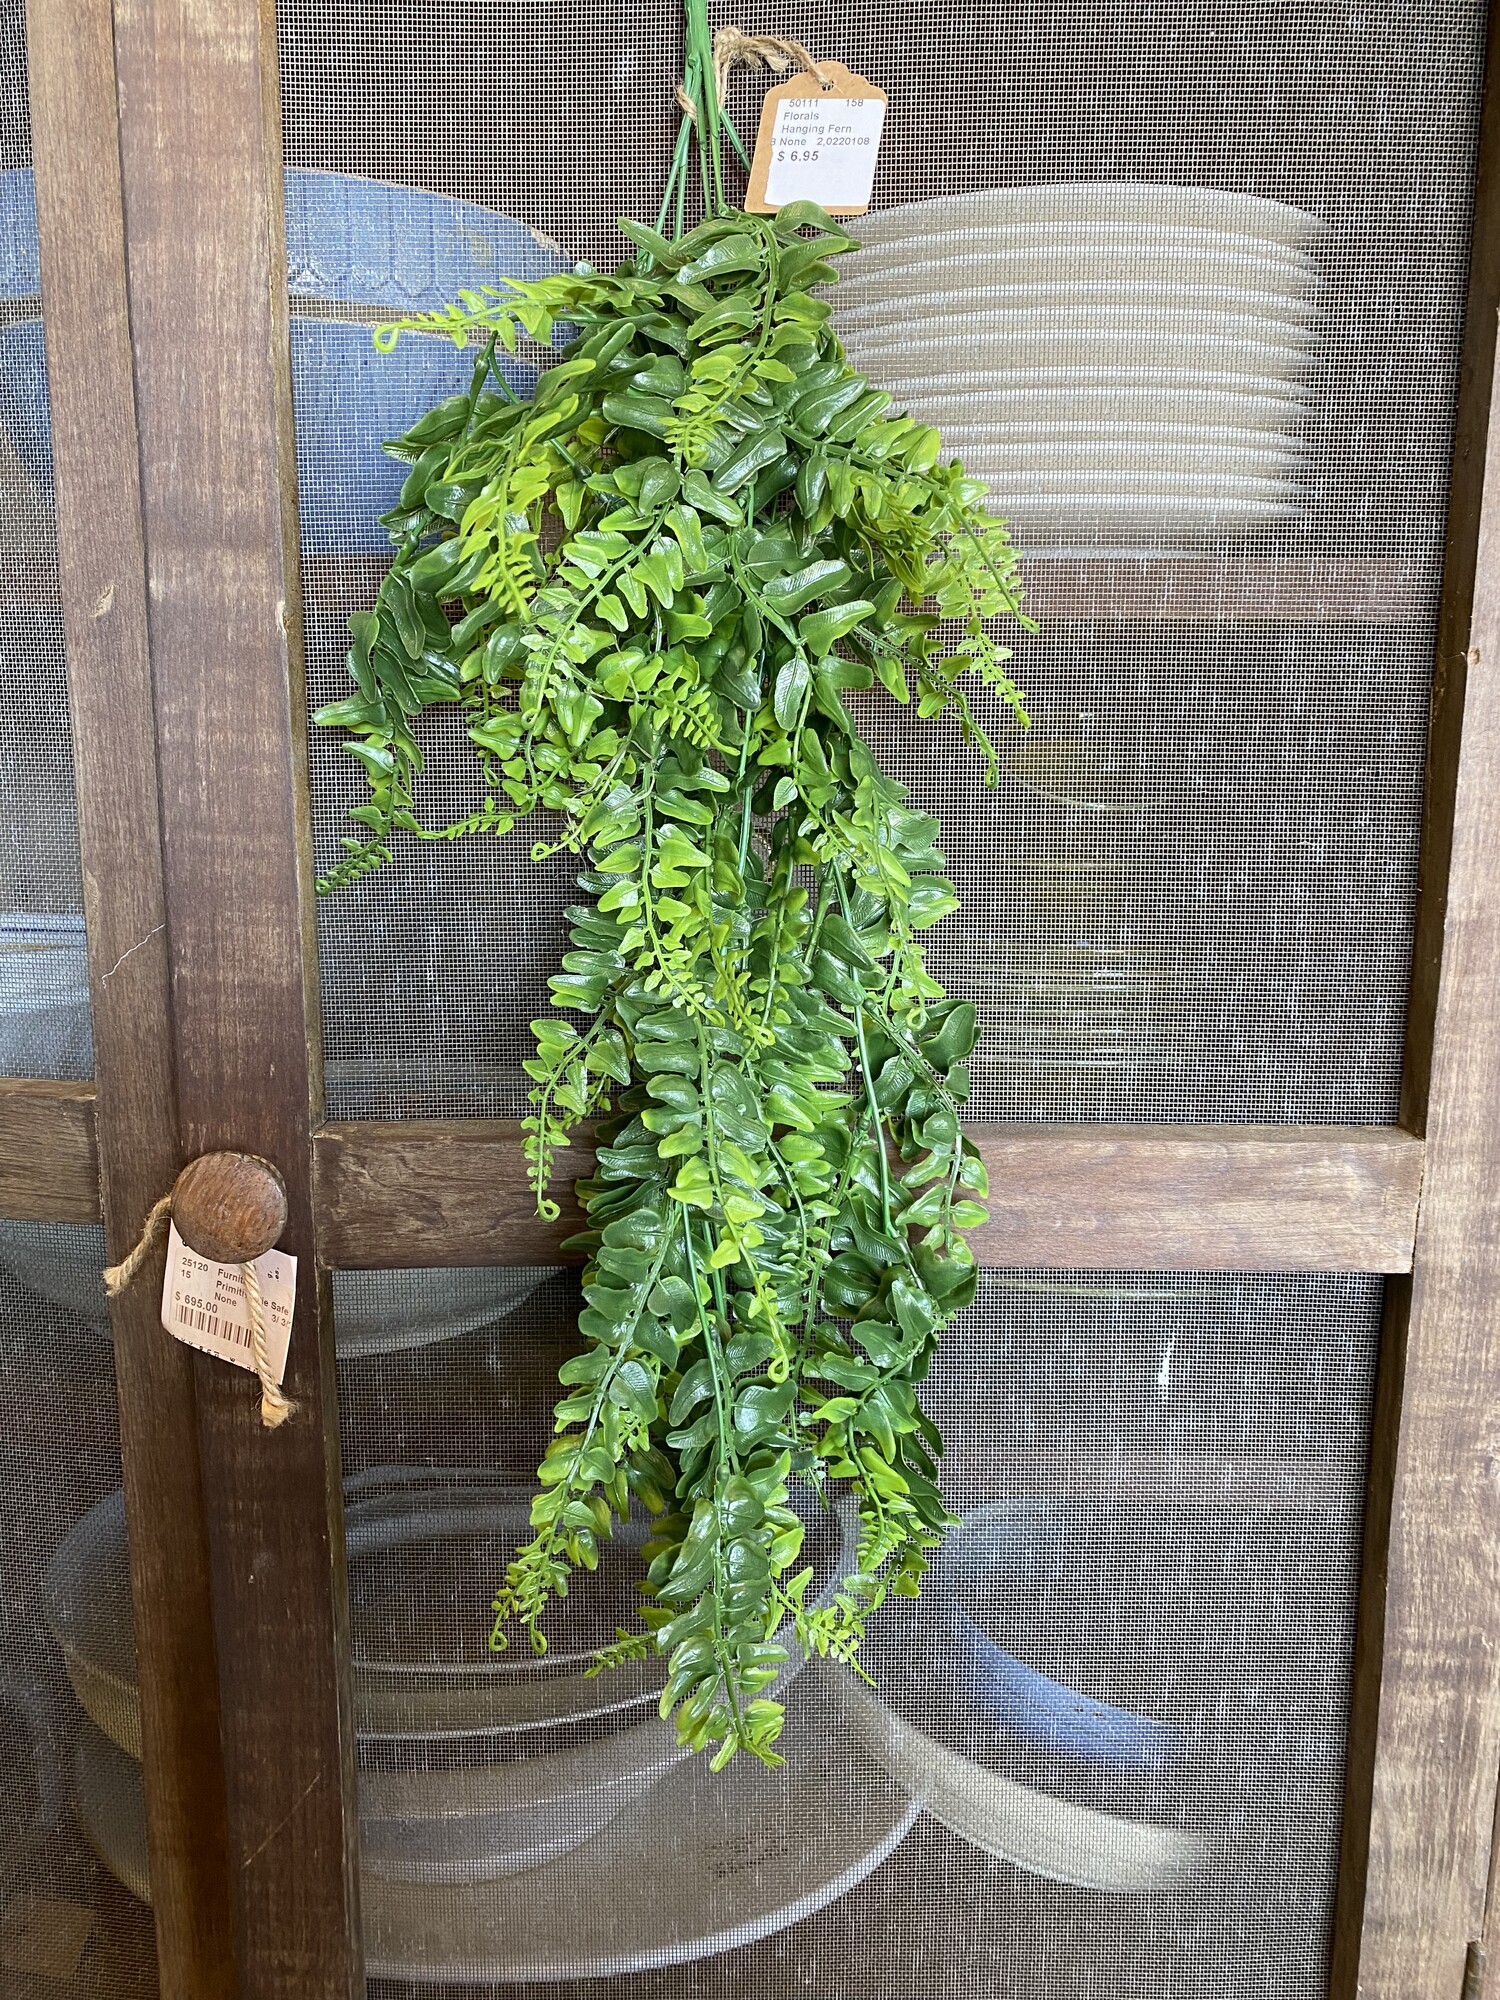 Draping Boston Fern measures 24 inches in length and is made of all plastic  which makes it perfect for use indoors, outdoors or any area that needs a touch of green without the hassel
Picture of vase contains 2 stems